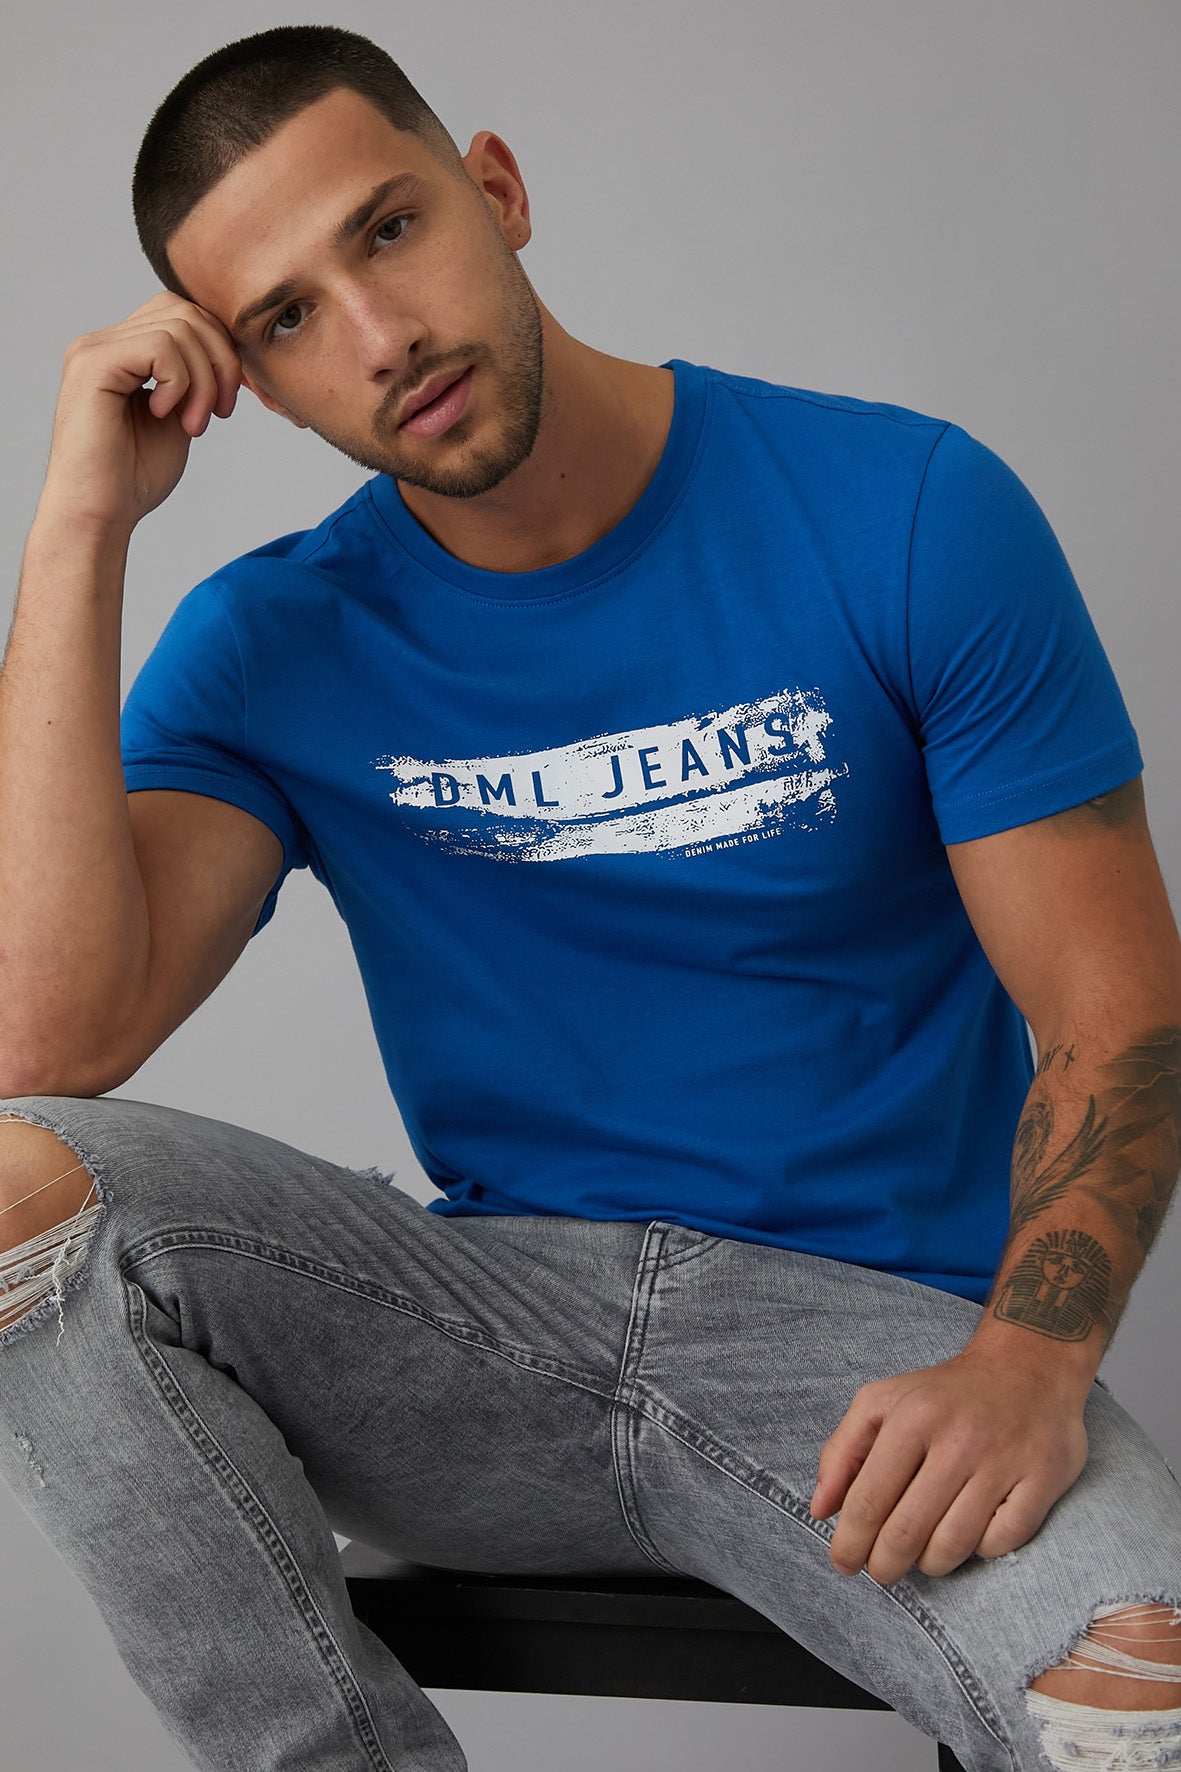 SCORE Printed crew neck t-shirt in ADMIRAL - DML Jeans 